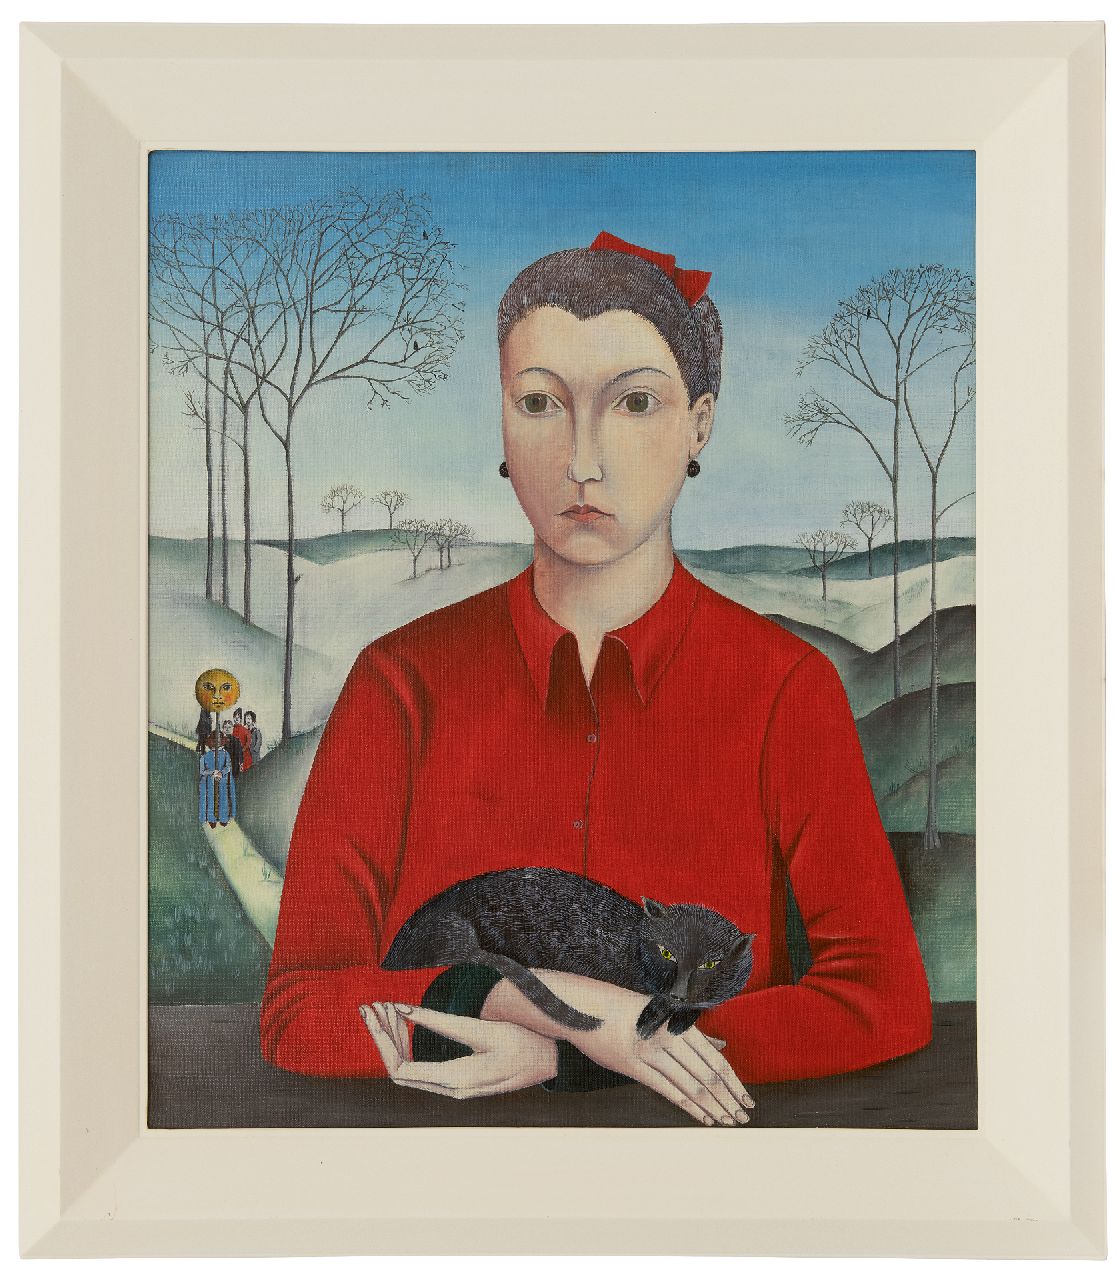 Matthäus D.  | Dieter Matthäus, Woman with red blouse and cat, oil on canvas 65.2 x 55.3 cm, signed on the reverse and dated on the reverse 9 november 1964